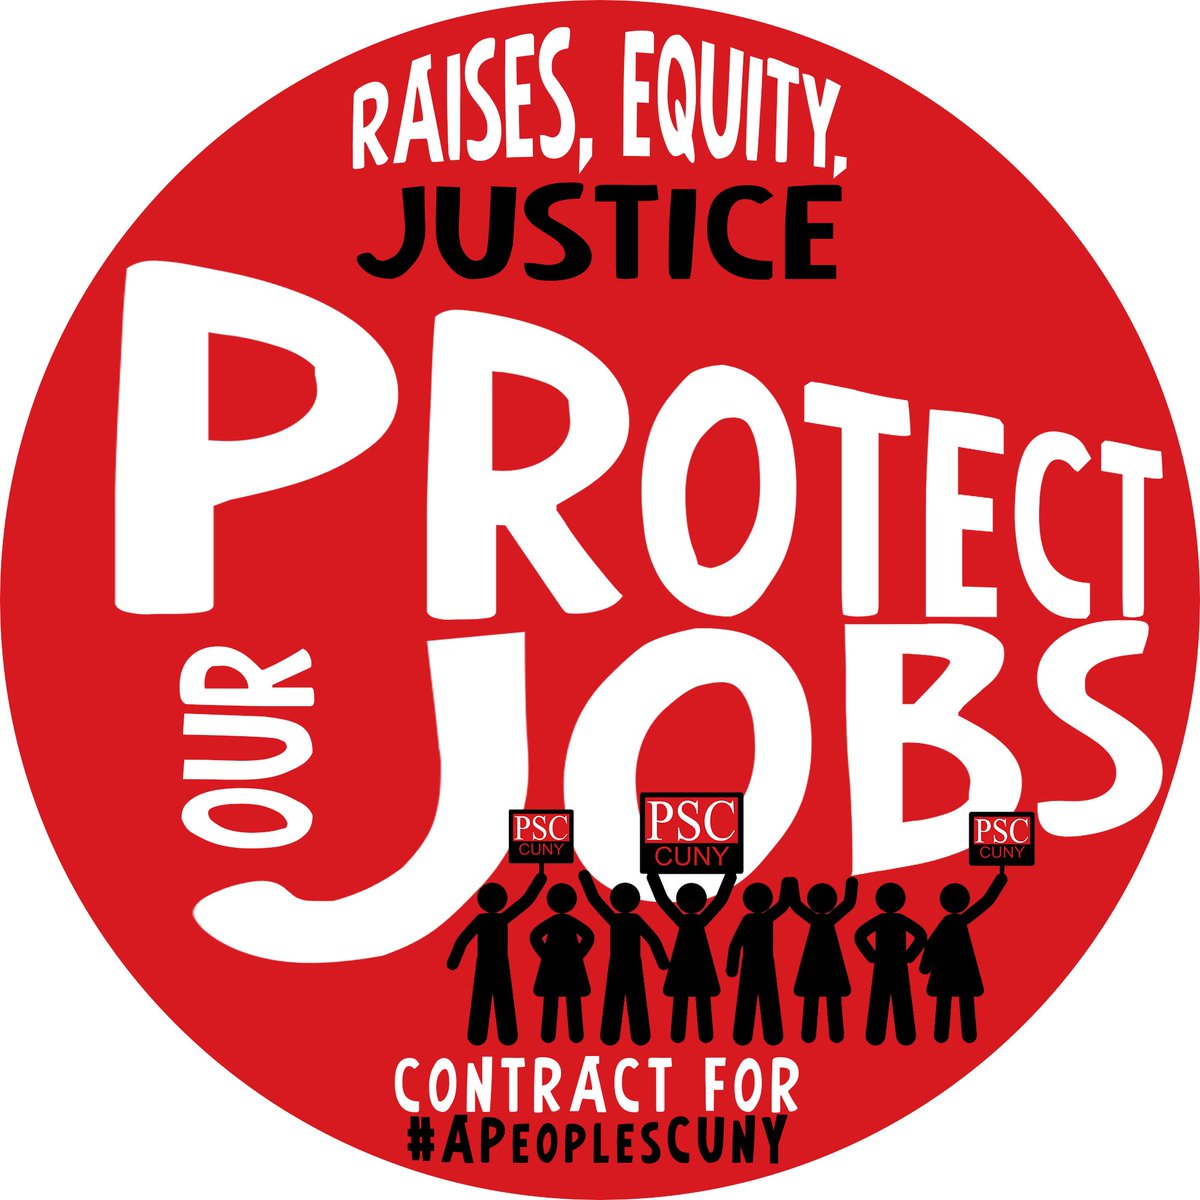 PSC members will be gathering today at 4pm at @BCCcuny, Playhouse Theatre, Roscoe Brown Performing Arts Bldg, 2155 University Avenue, Bronx, NY 10453 to demand the contract they deserve! Join us & wear your PSC red! ✊ Contract for #APeoplesCUNY PSC-CUNY.ORG/MAY20